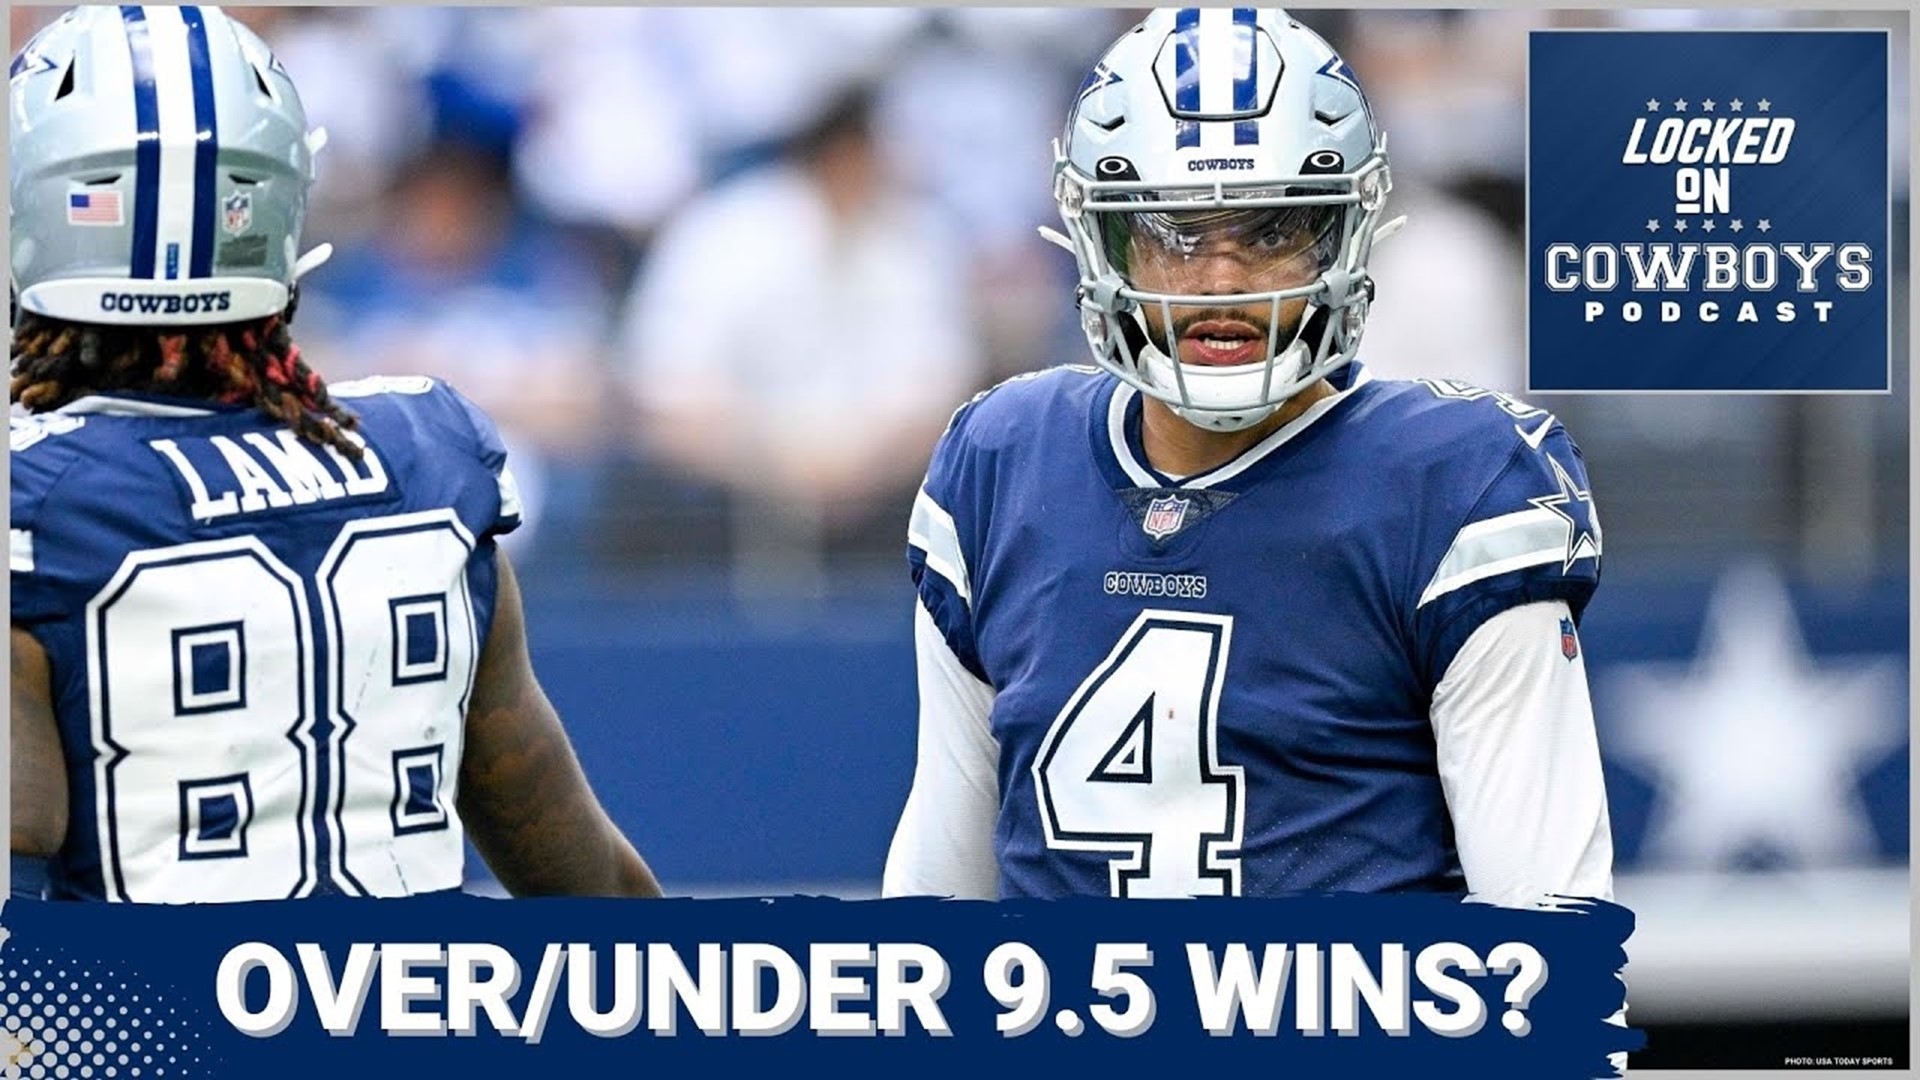 Over/Under 9.5 Wins For The Dallas Cowboys?